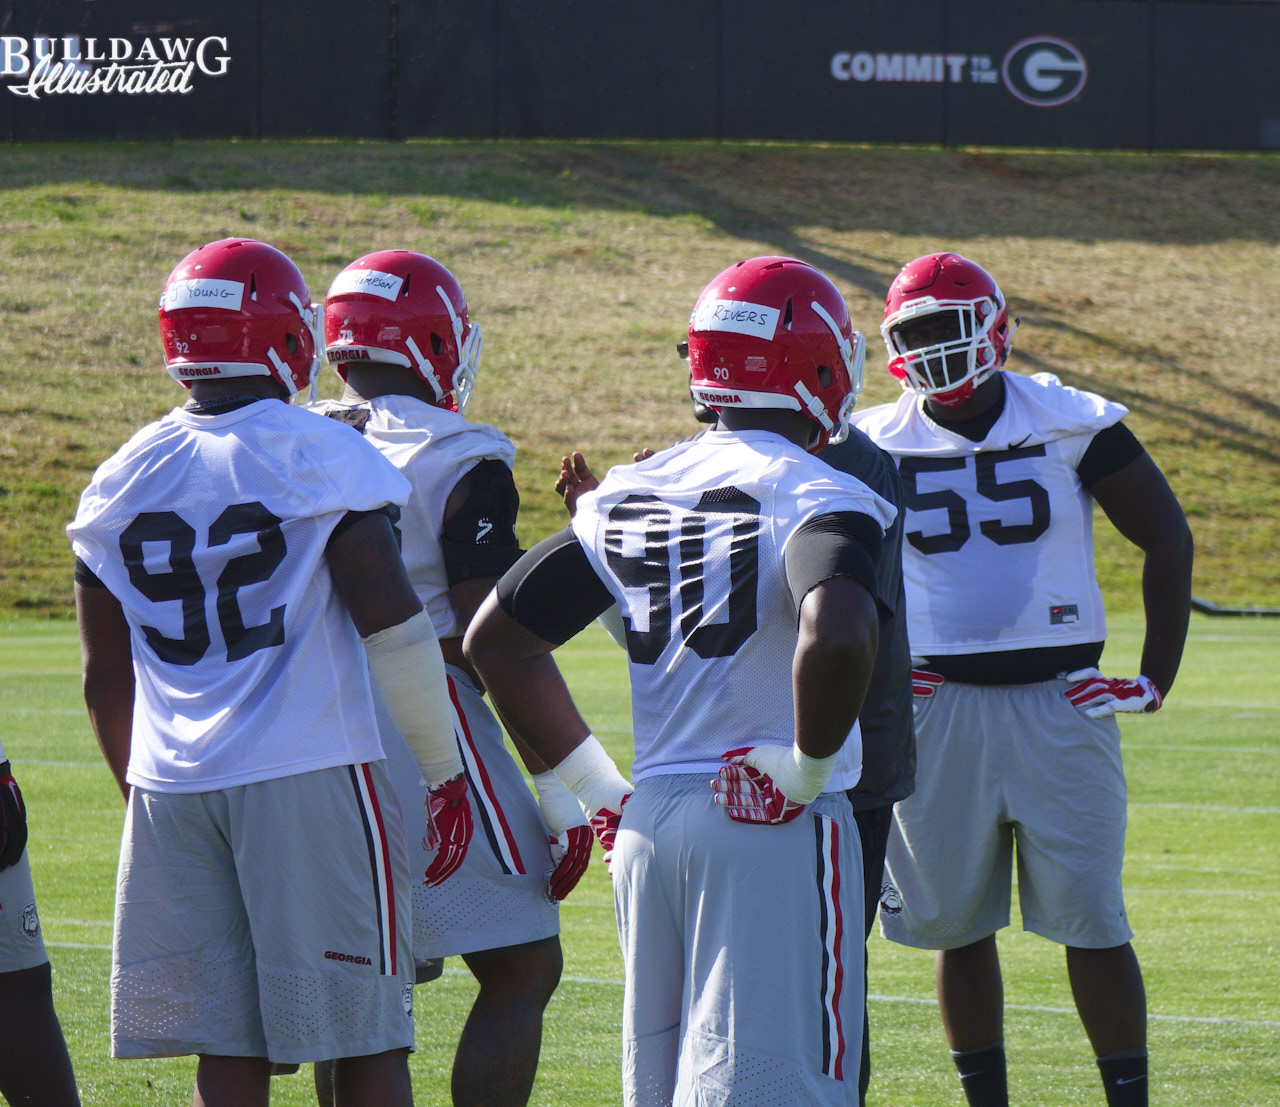 Dyshon Sims (55), Justin Young (92) and Chauncey Rivers (90) get a short break between reps